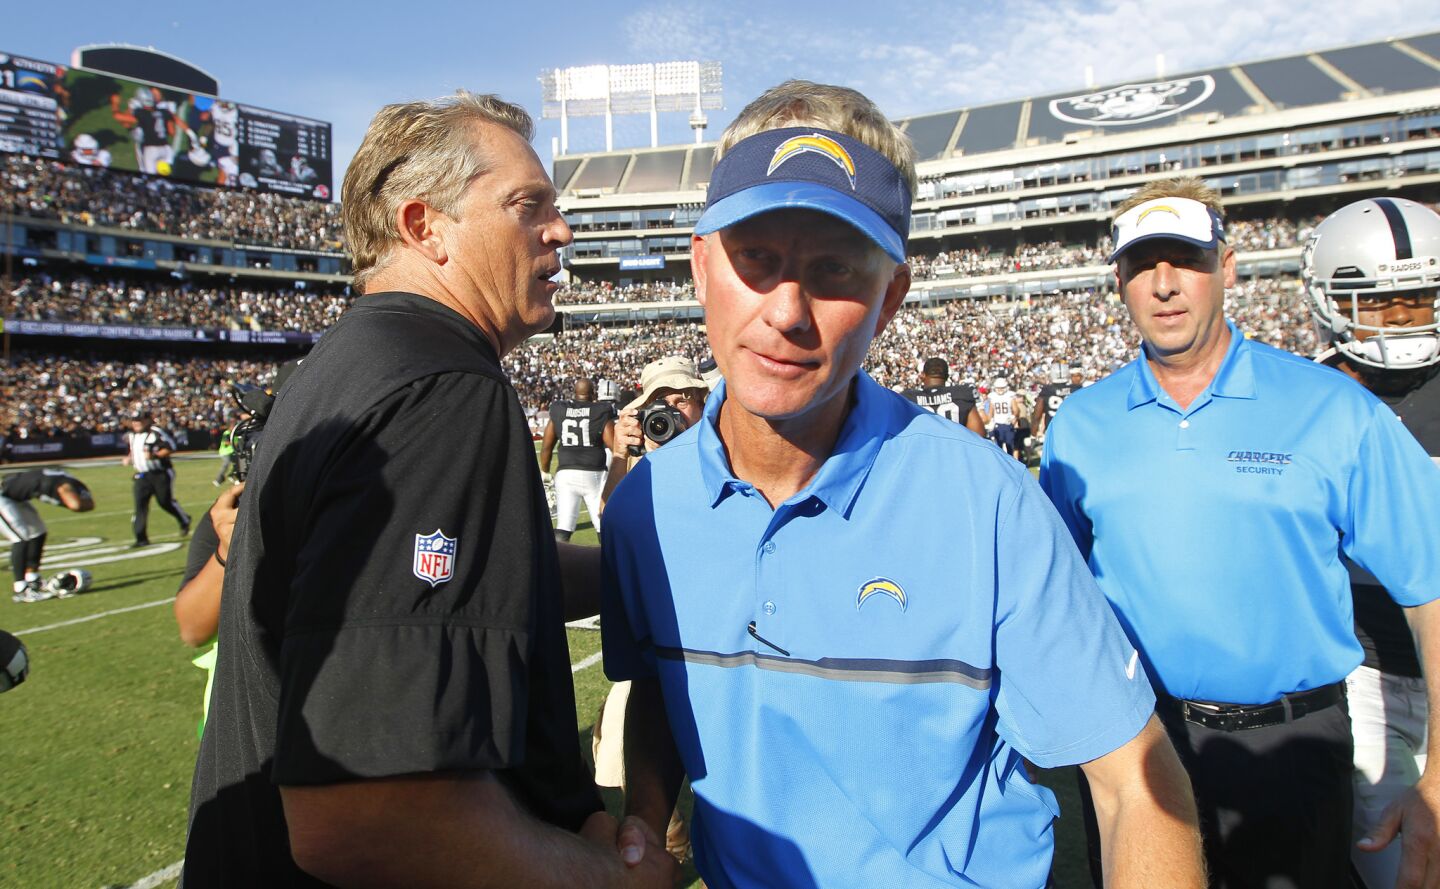 San Diego Chargers coach Mike McCoy meets with Raiders coach Jack Del Rio after a 34-31 loss to the Raiders in Oakland on Oct. 9, 2016. (Photo by K.C. Alfred/The San Diego Union-Tribune)